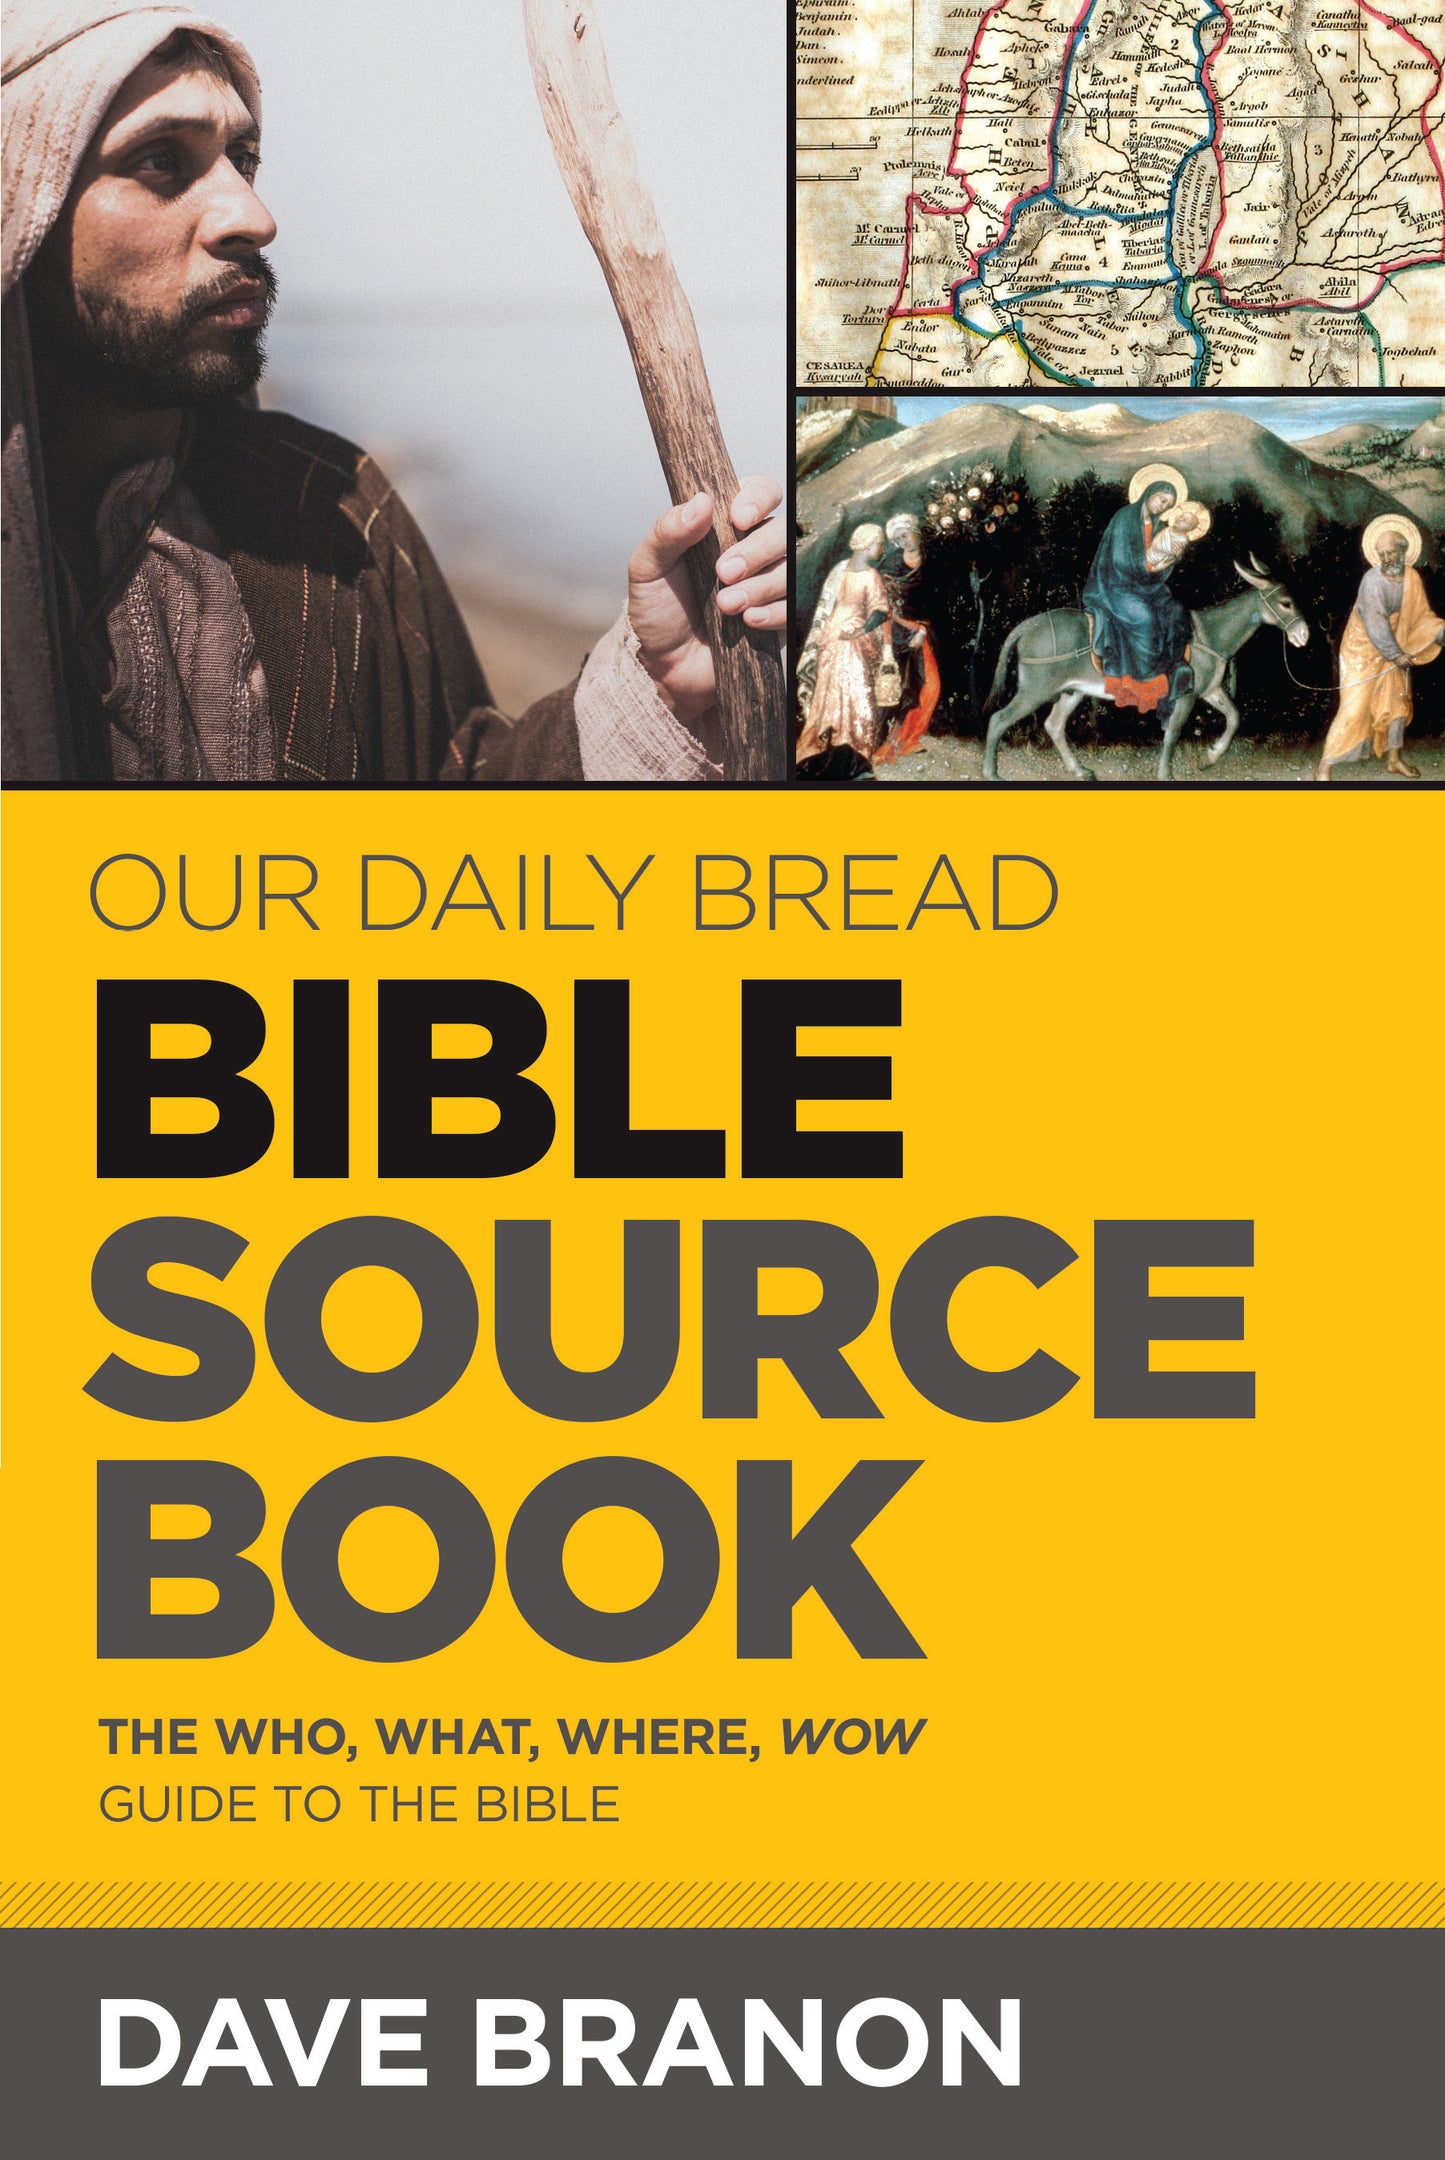 Our Daily Bread Bible Sourcebook [E-book]